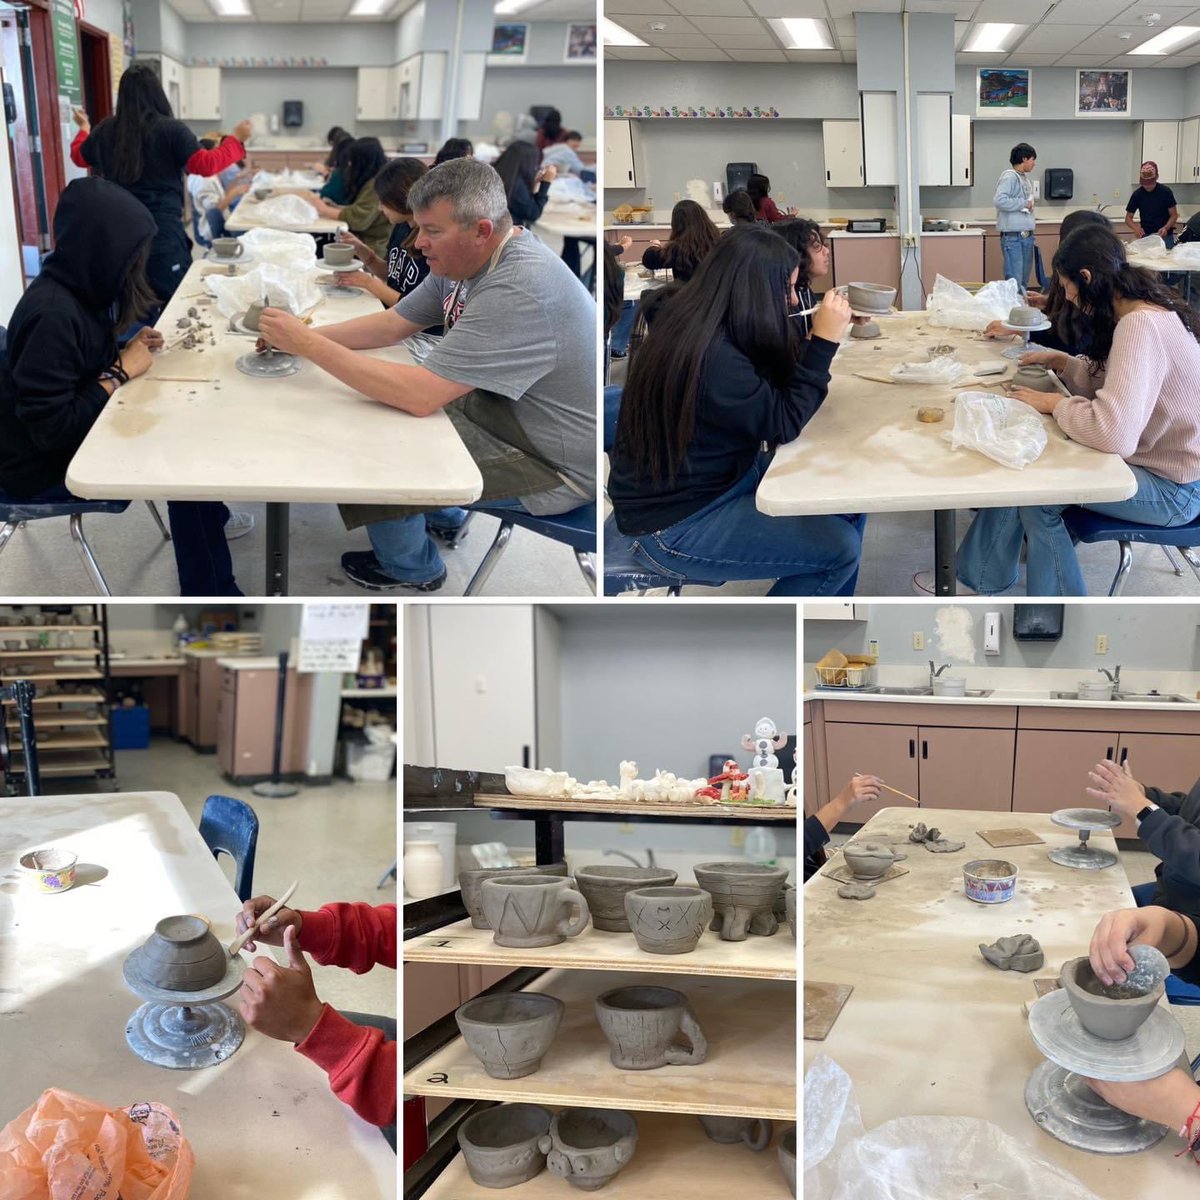 Mr. Berg sits with his students and offers encouragement and advice as they mold clay sculptures. Each student is focused on their unique creation. 👩‍🎨🧑‍🎨
#thegrizzlyway #greenfieldguaranteed #AllMeansAll #ThisisGUSD #ProudToBeGUSD